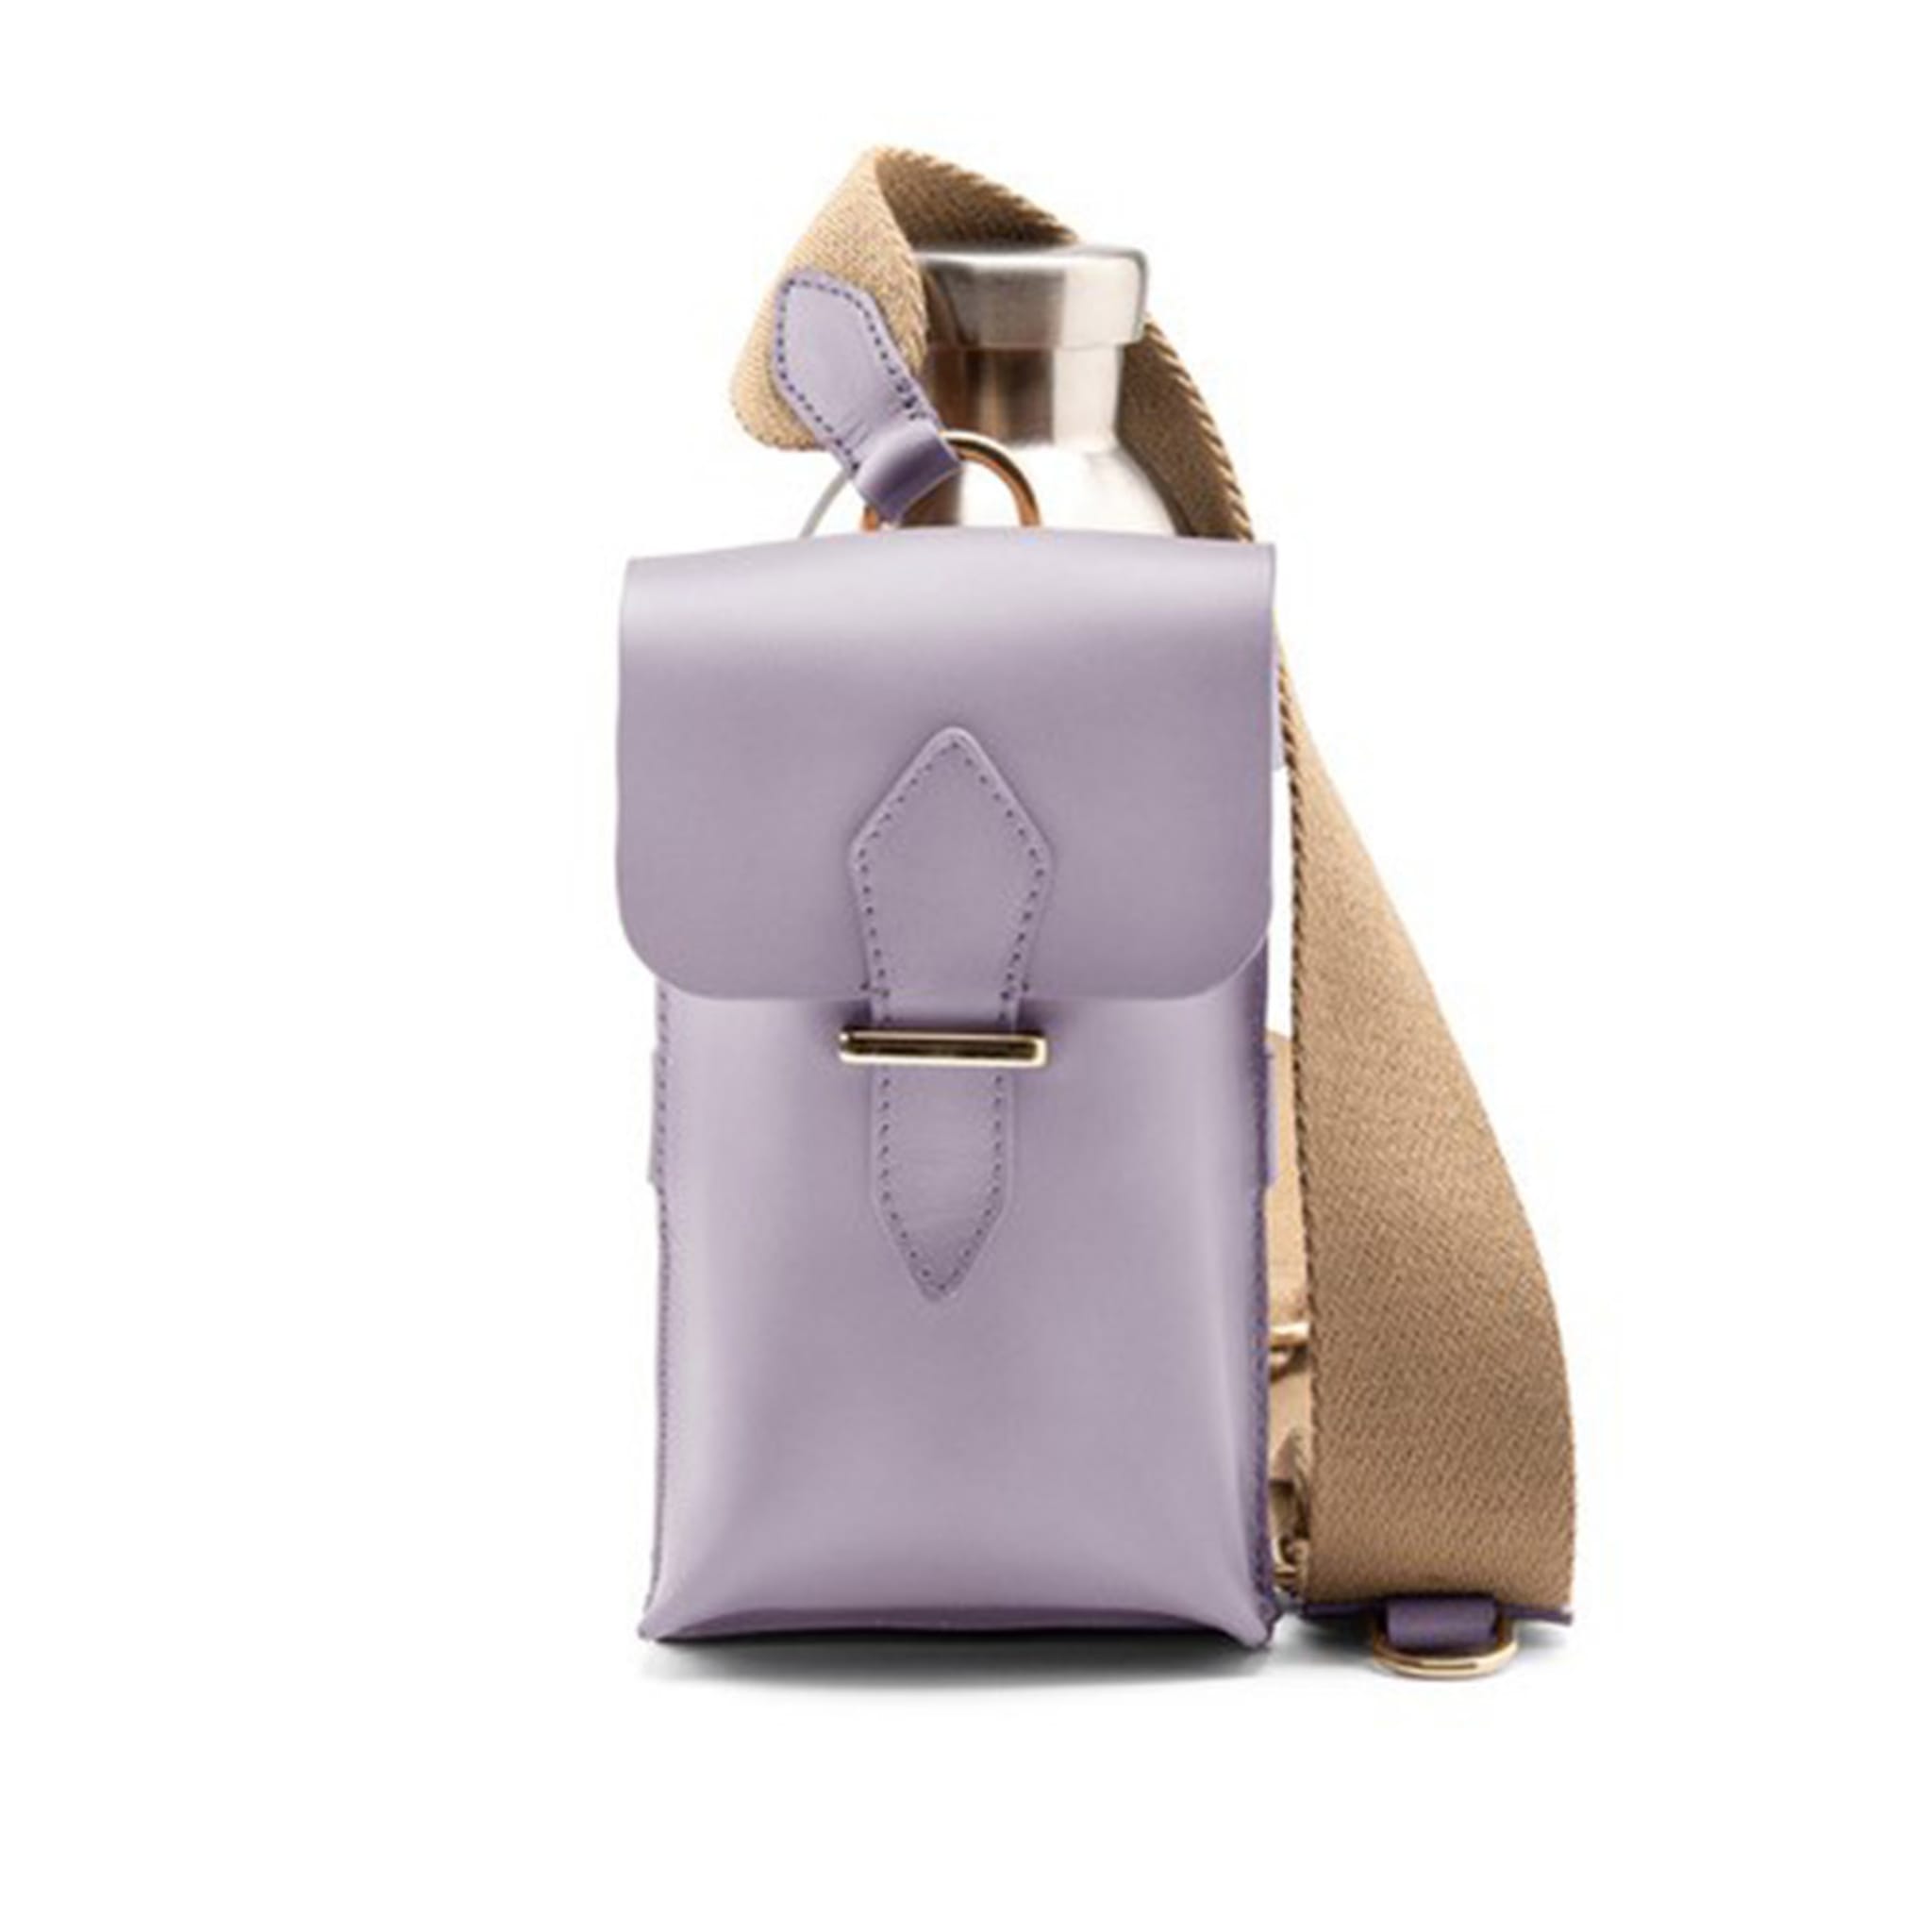 Bottle Bag with Pocket and Bottle Lilla Leather - Alternative view 1